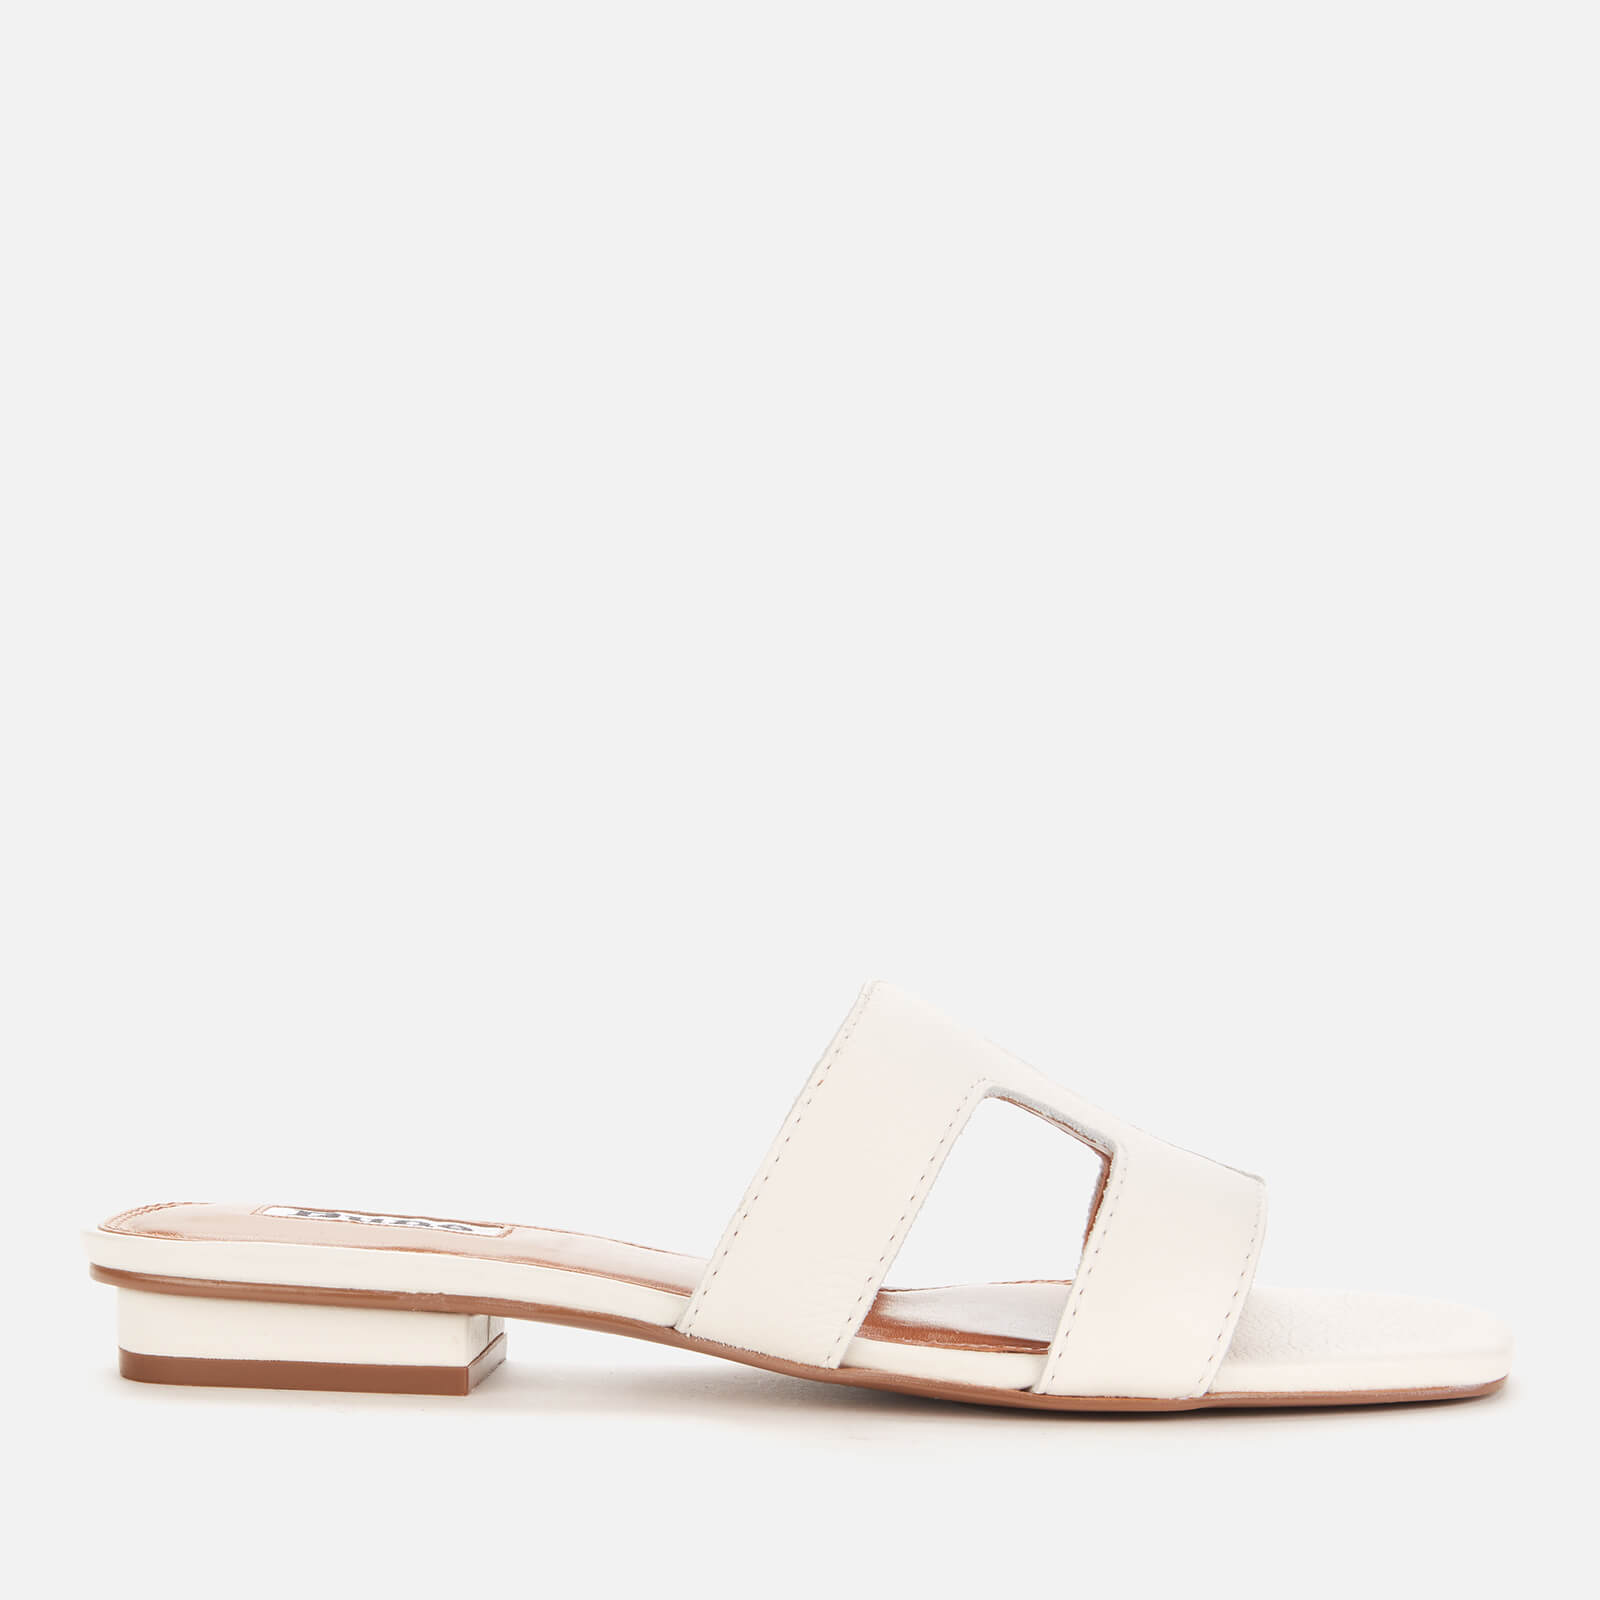 Dune Women’s Loupe Leather Sandals - White